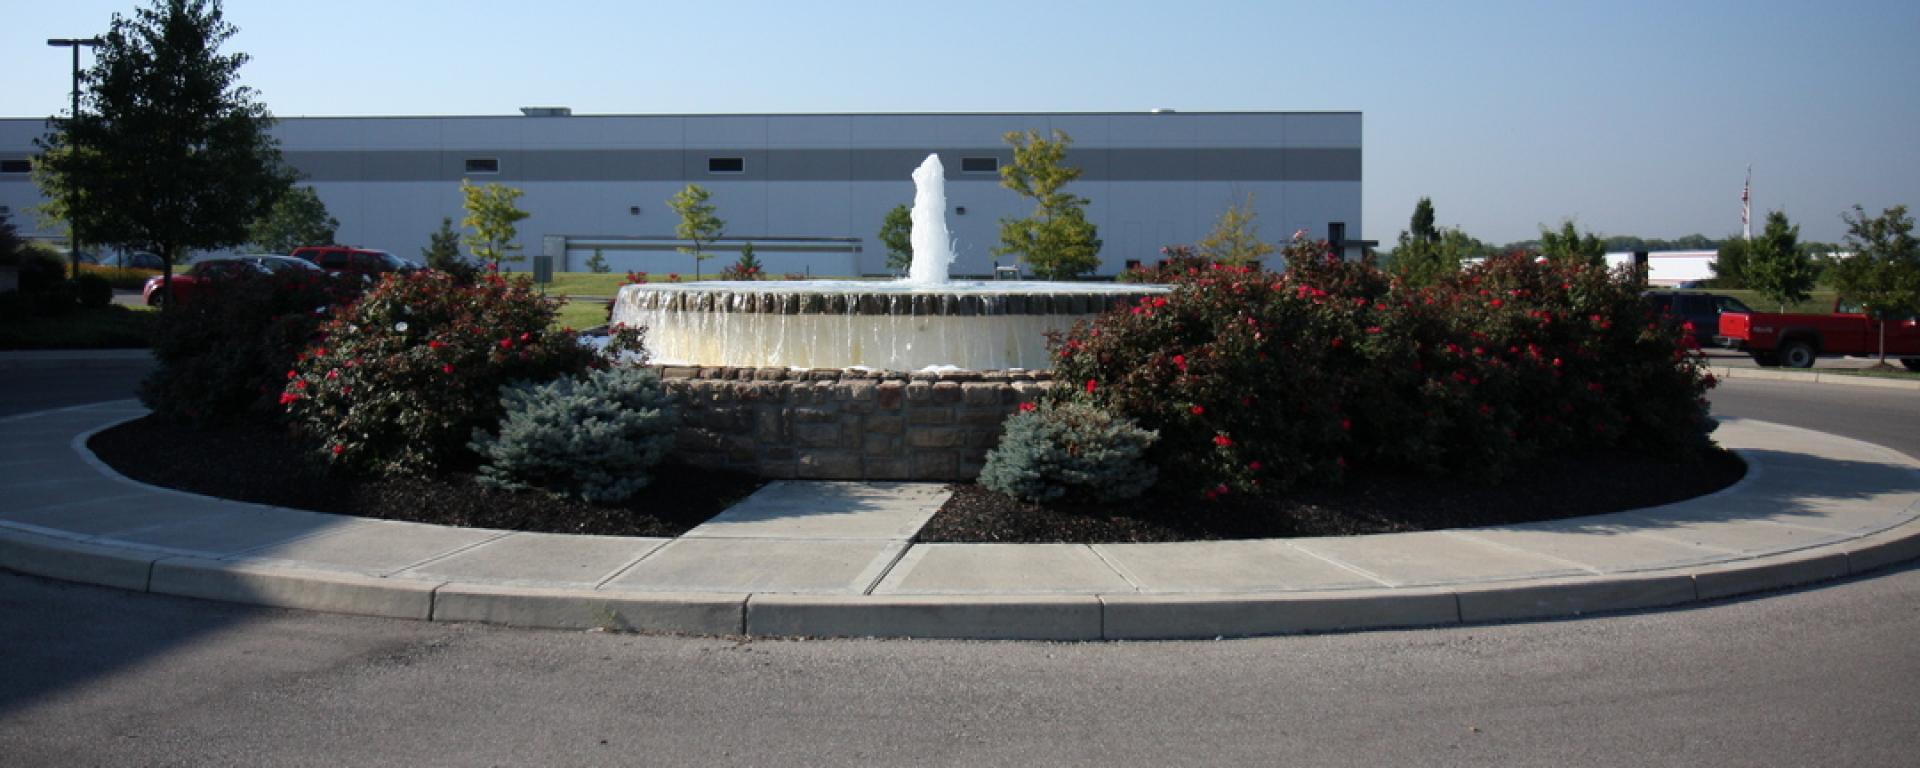 fountain and landscaping